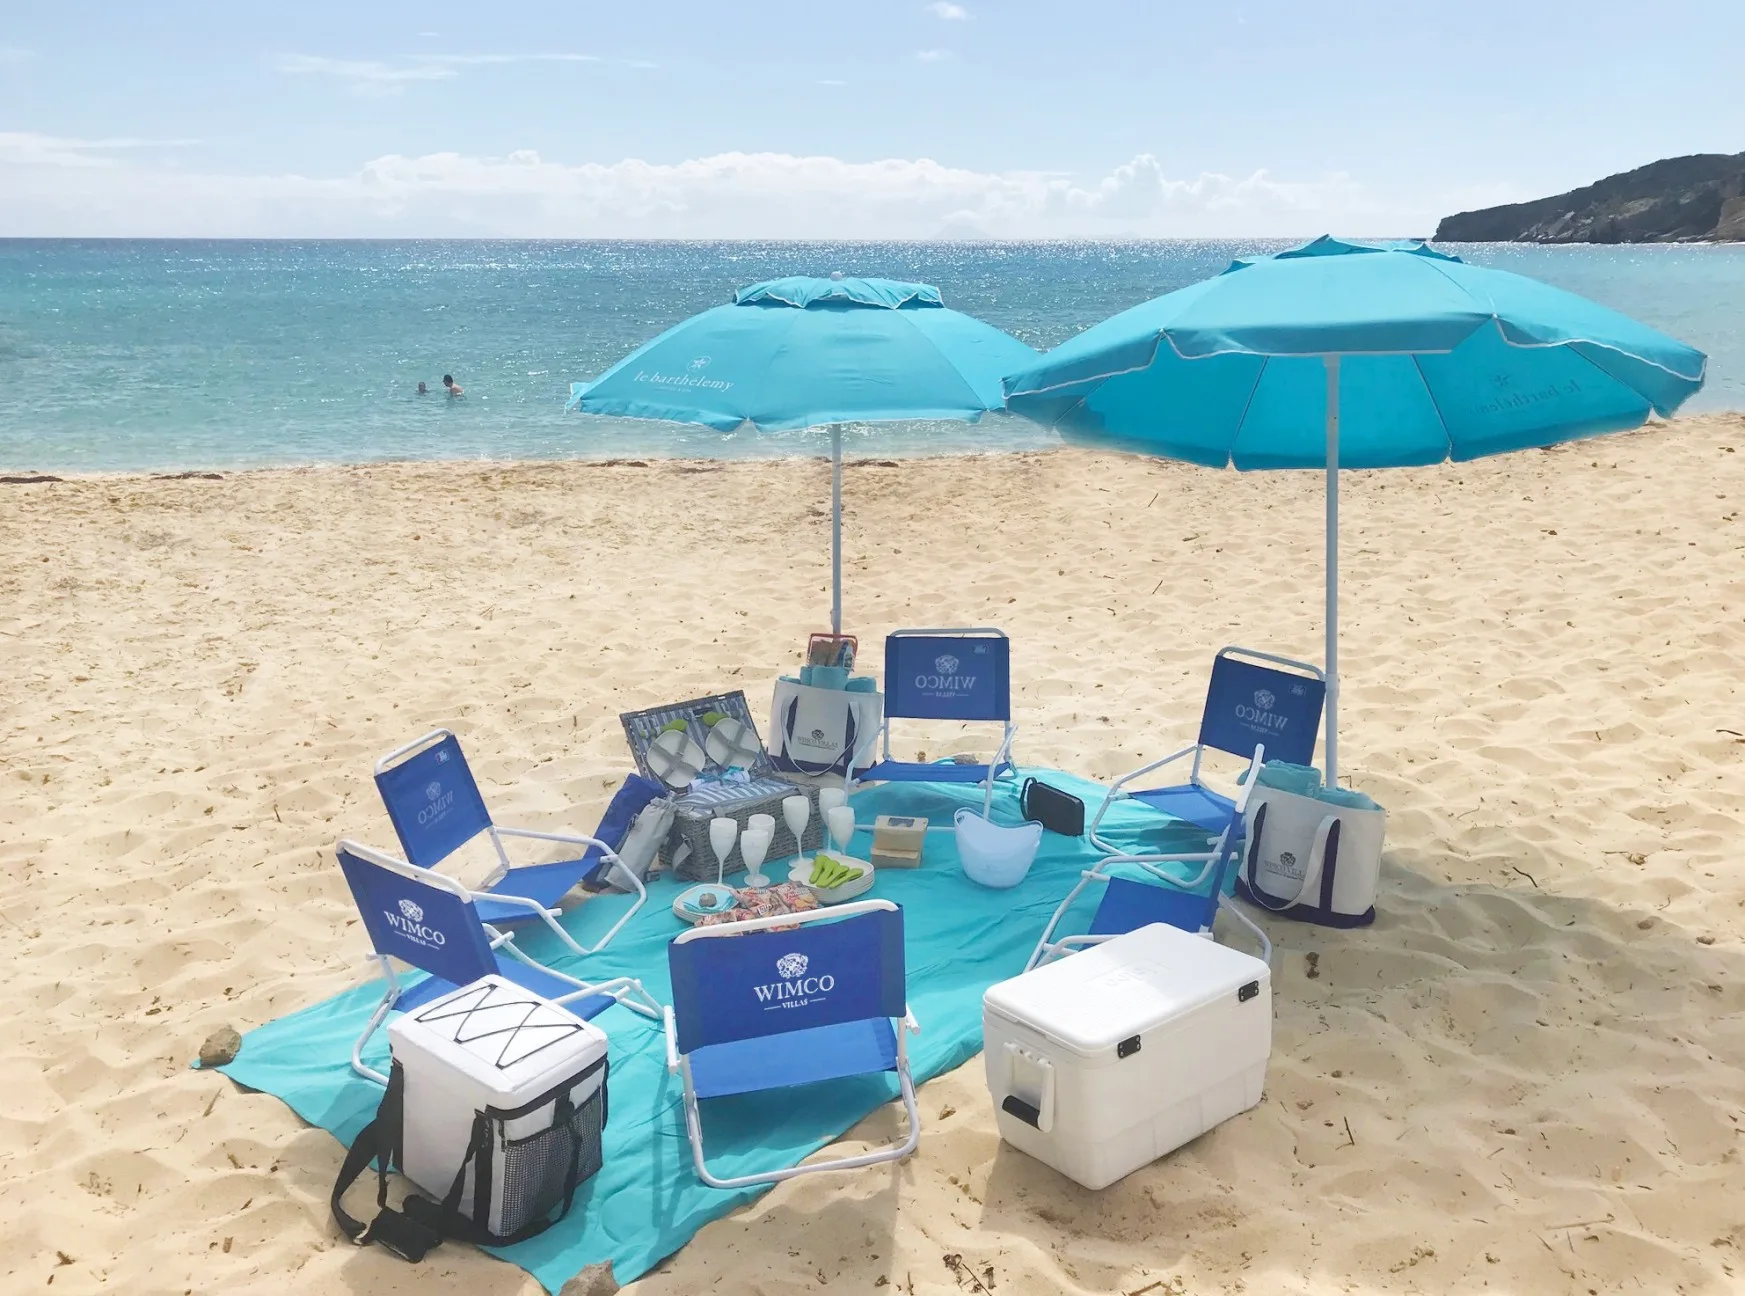 WIMCO Launches Catered Picnic Beach Lunch On St Barths